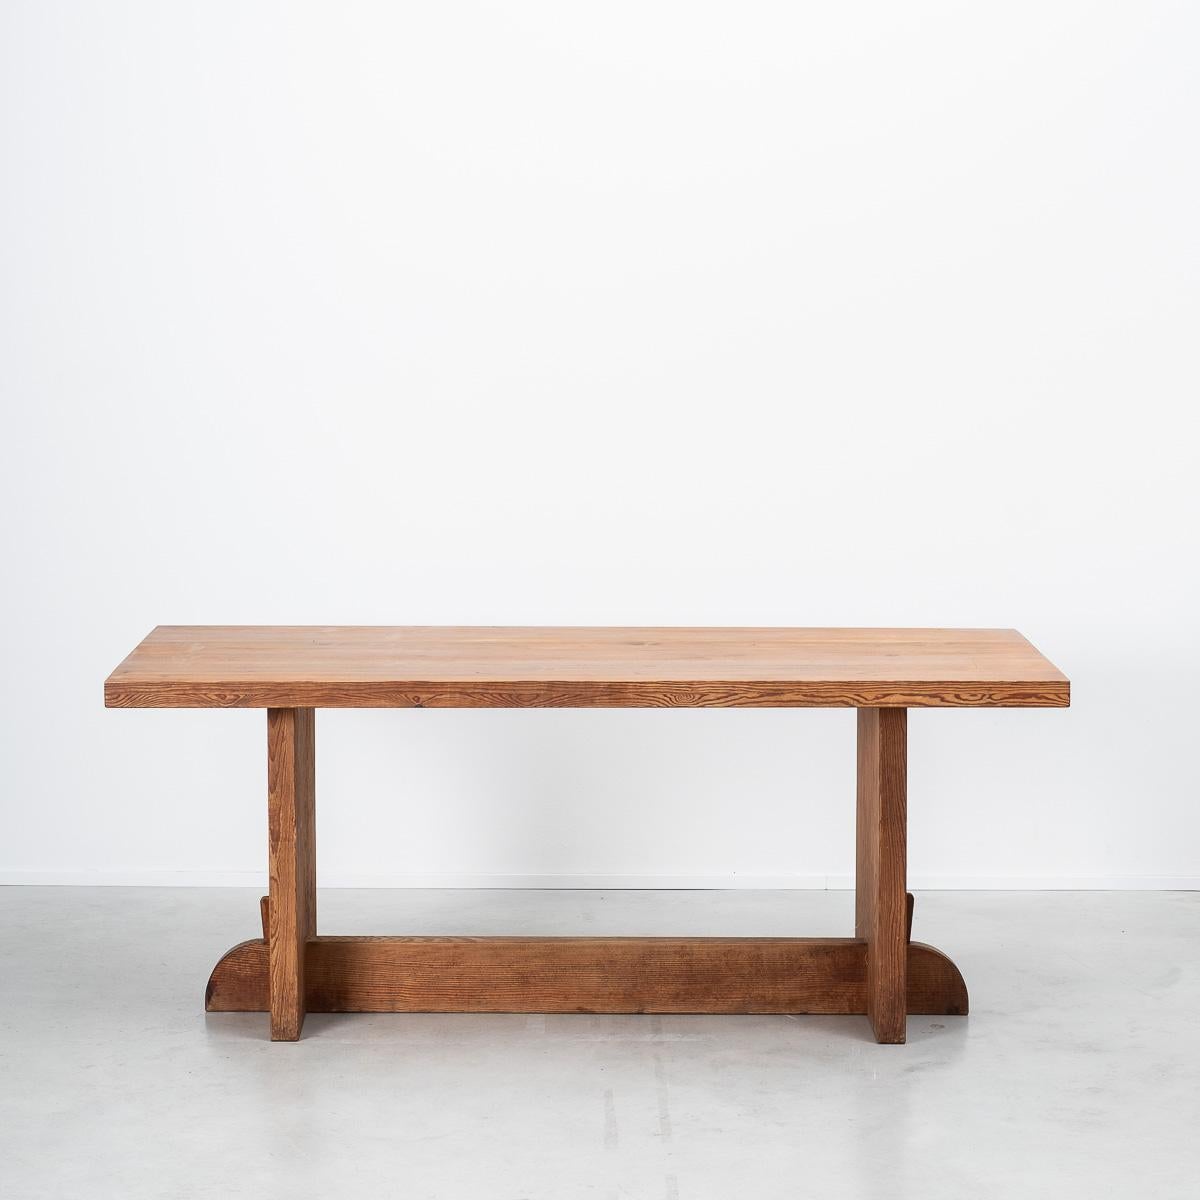 A Swedish Pine Lovö dining table designed by Axel Einar Hjorth for Nordiska Kompaniet in the 1930s. Hjorth was major contributor to the burgeoning Swedish design culture that was recognized internationally in the 1920s. He effectively introduced